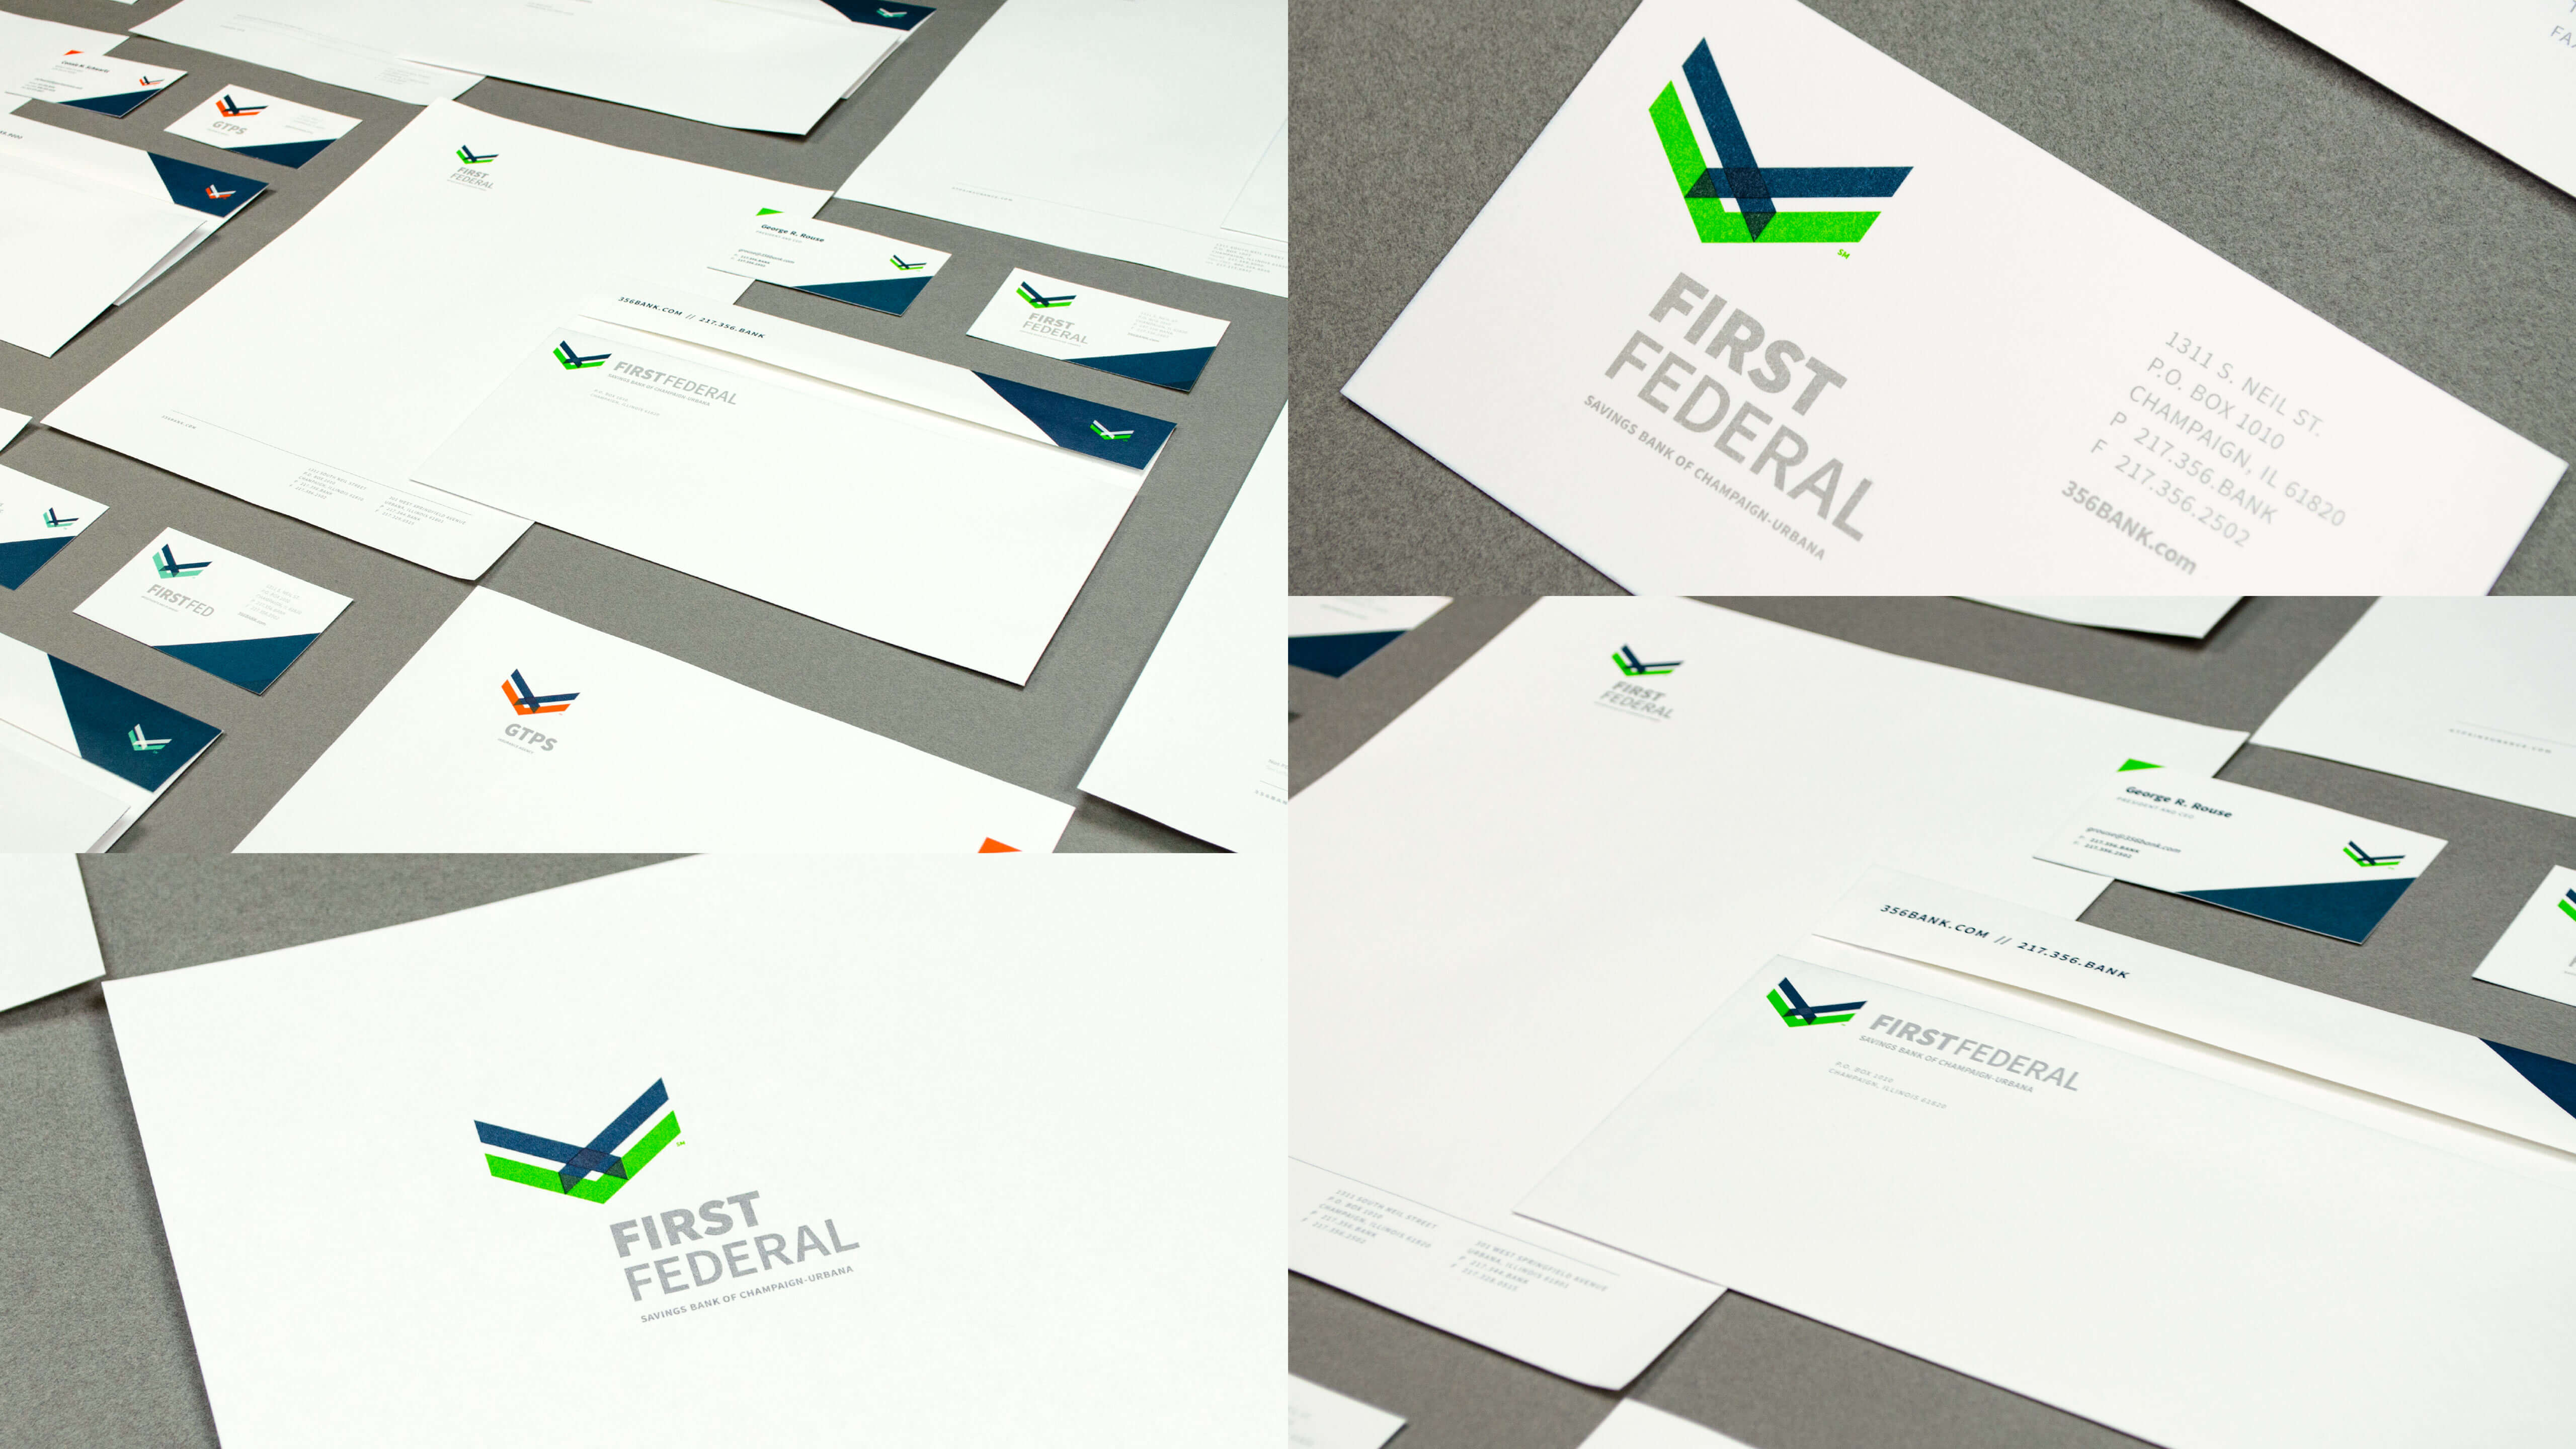 First Federal Savings Bank of Champaign-Urbana Corporate Identity